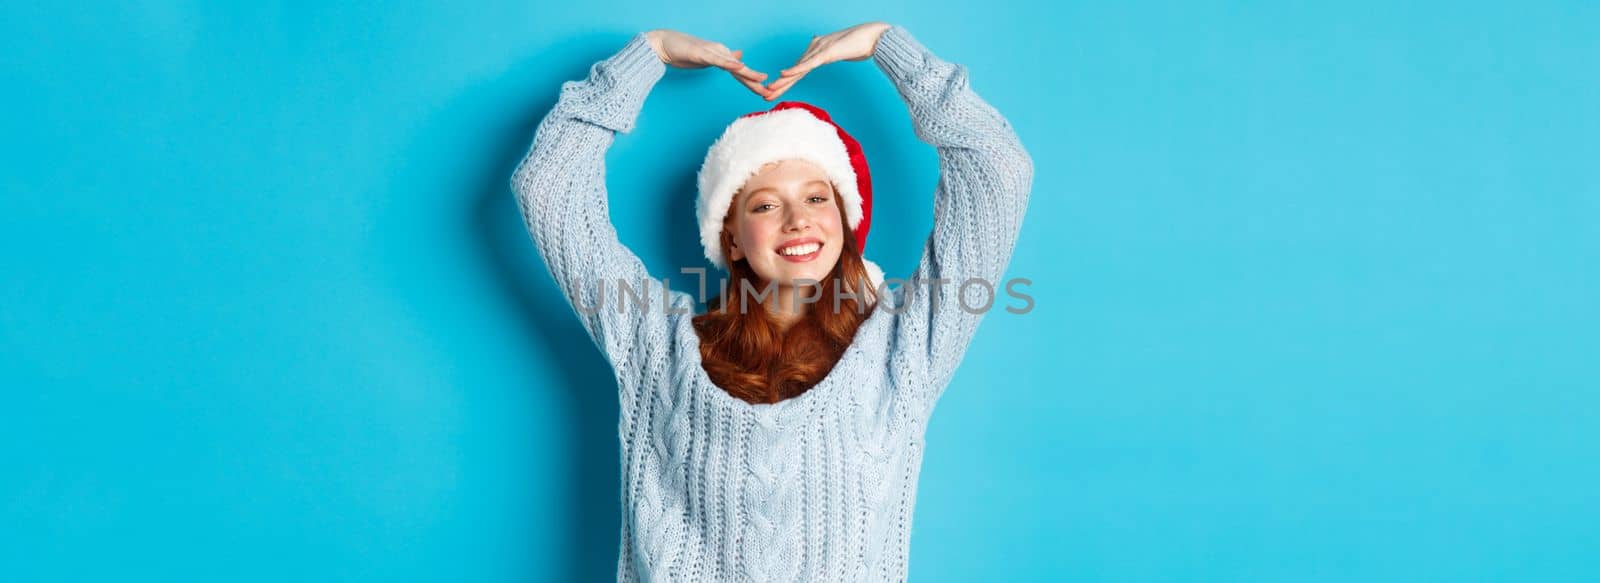 Winter holidays and Christmas Eve concept. Cute redhead teen girl in santa hat and sweater, making heart sign and smiling, wishing merry xmas, standing over blue background.